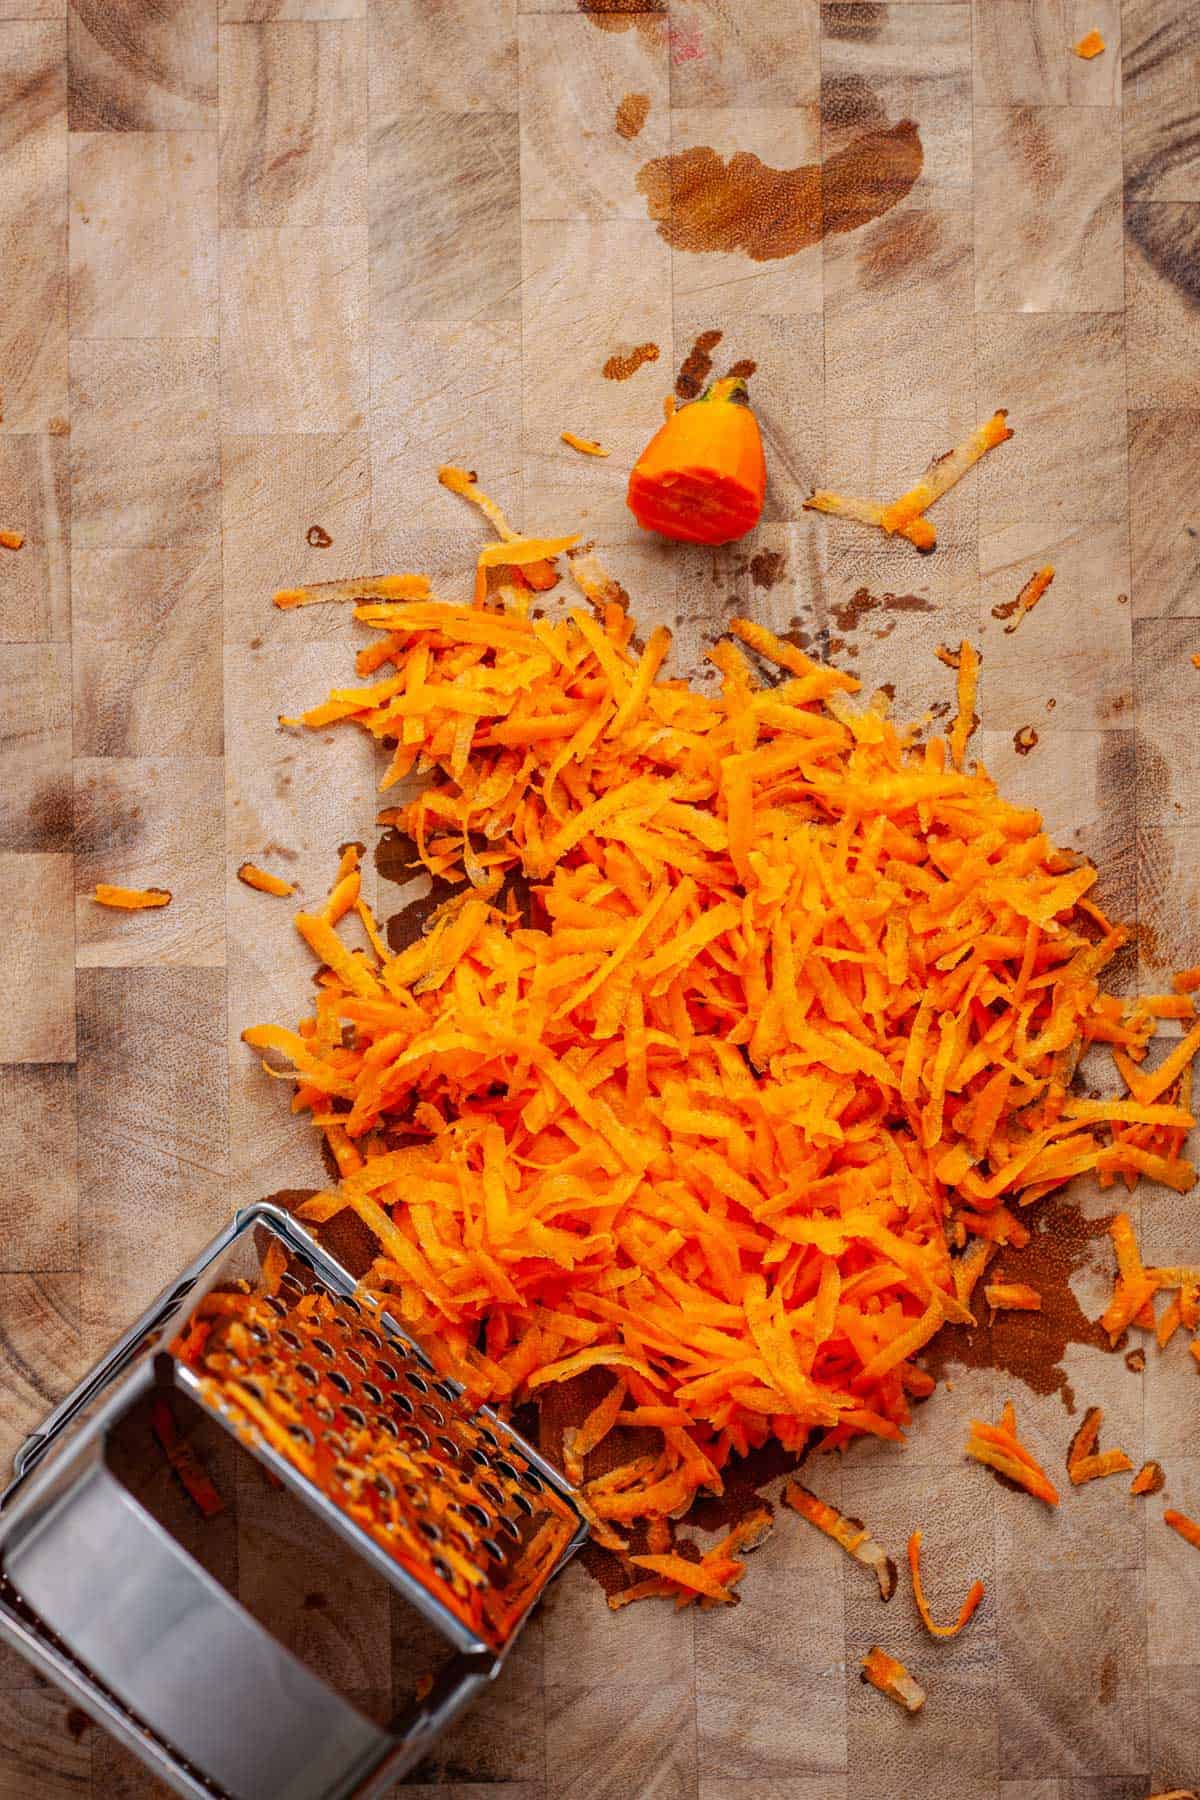 Grated carrots with a box grater on a butcherblock cutting board.